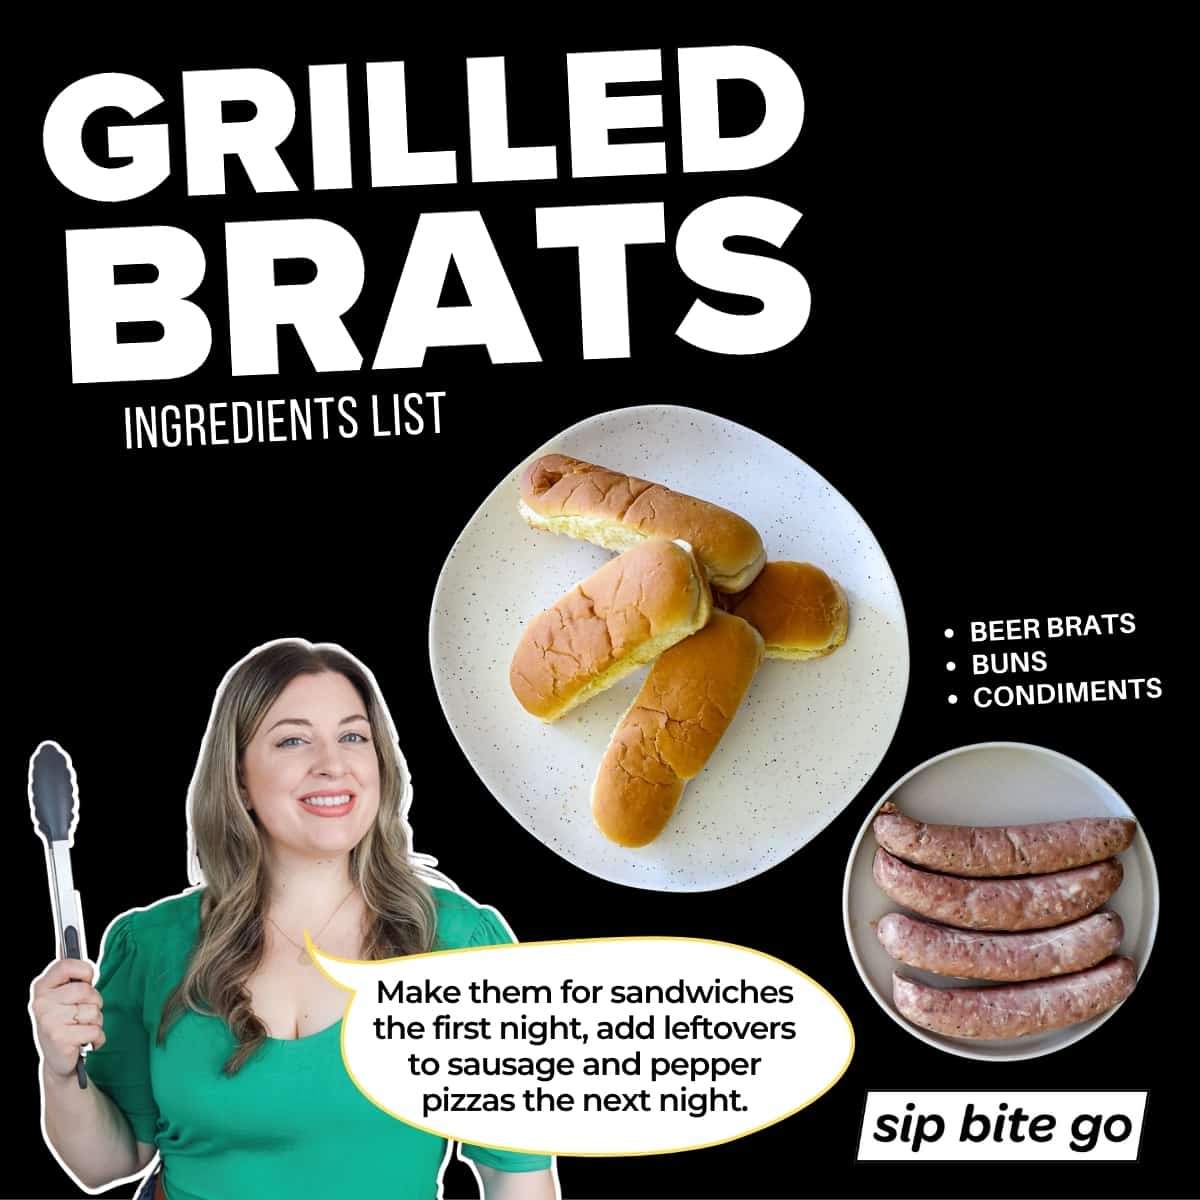 Grill Brats Ingredients List Infographic with captions.